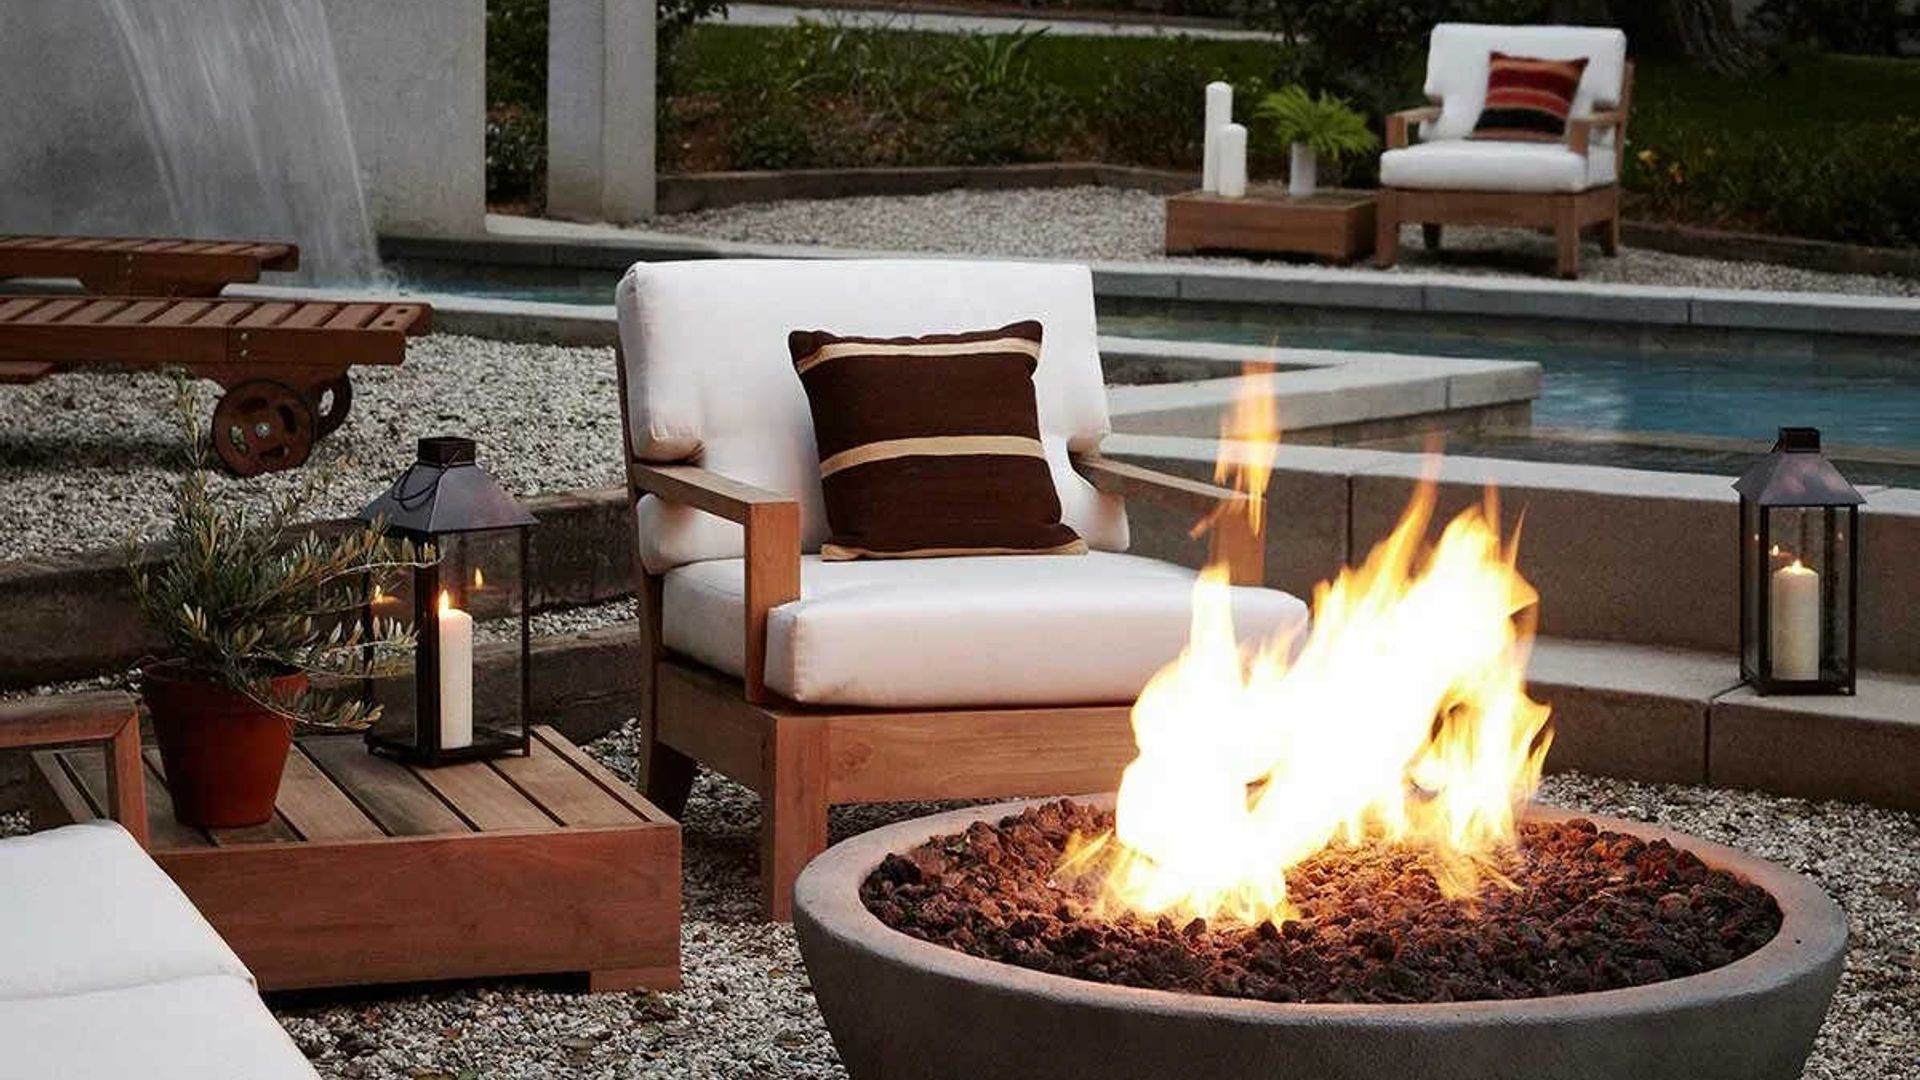 Best patio heaters & fire pits for your garden to keep you warm this season